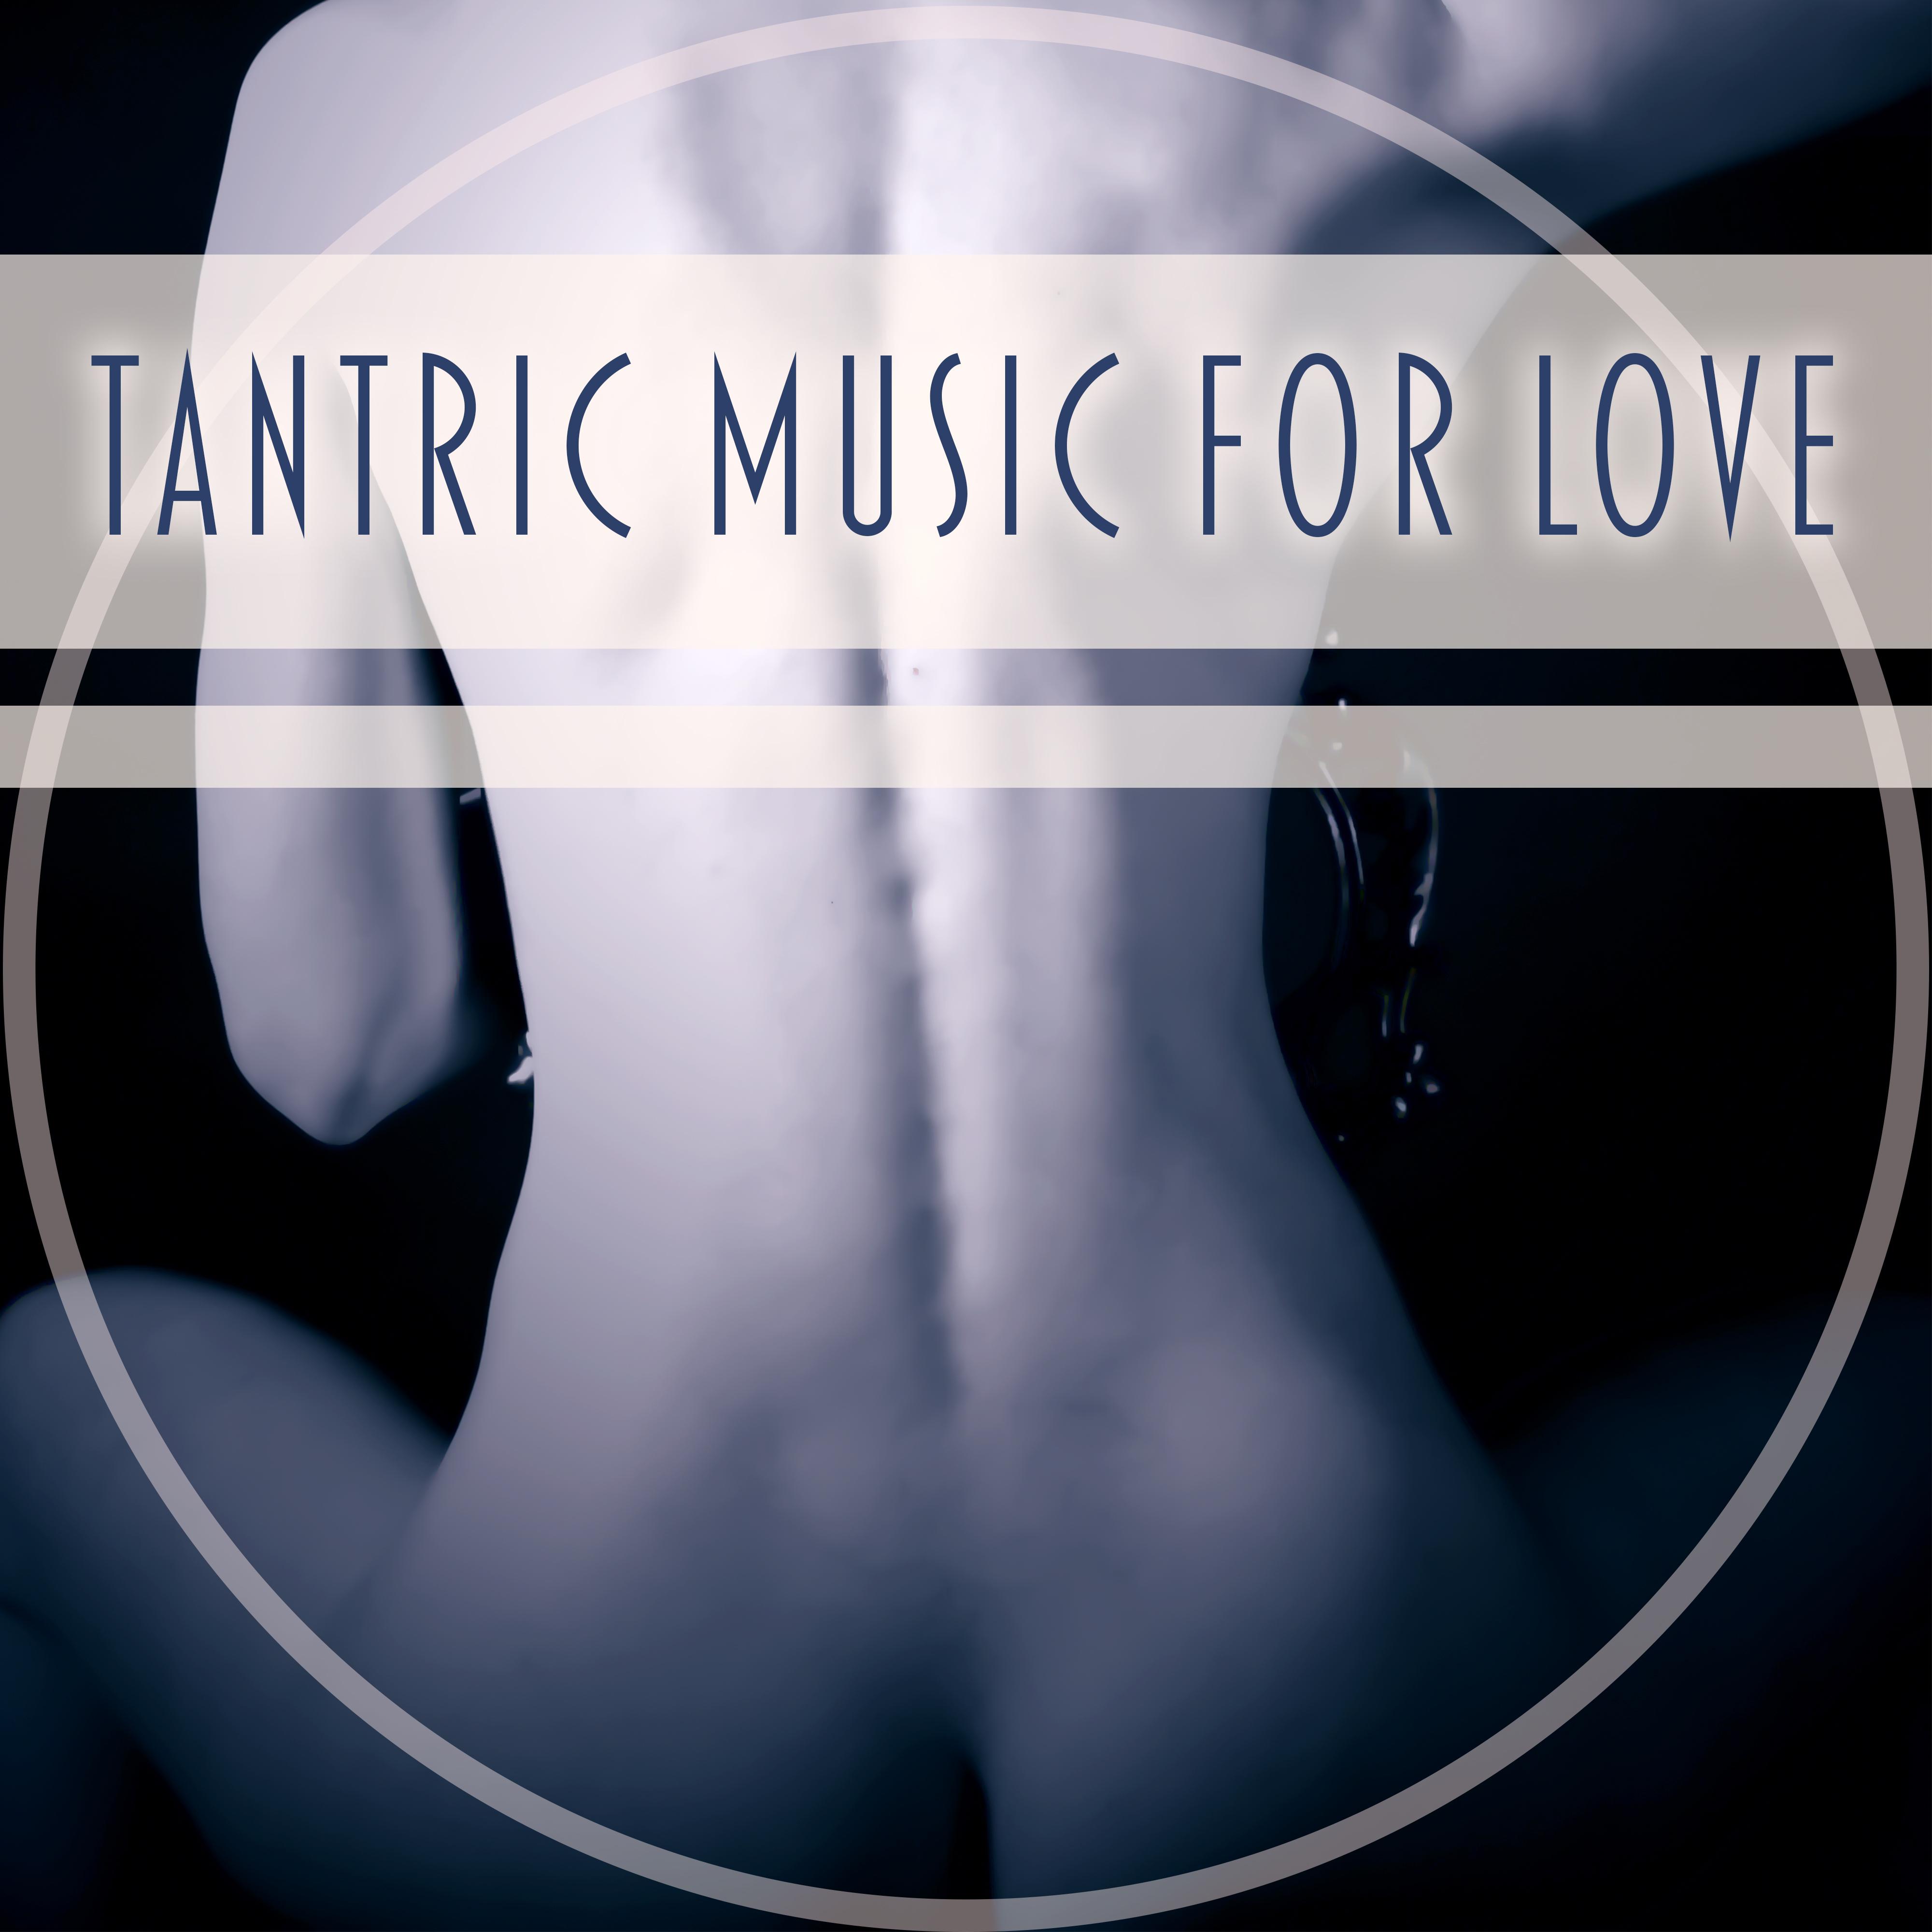 Tantric Music for Love – Sensual Nature Sounds, Erotic Massage, Tantric Love, Pure Relaxation, Instrumental Sounds